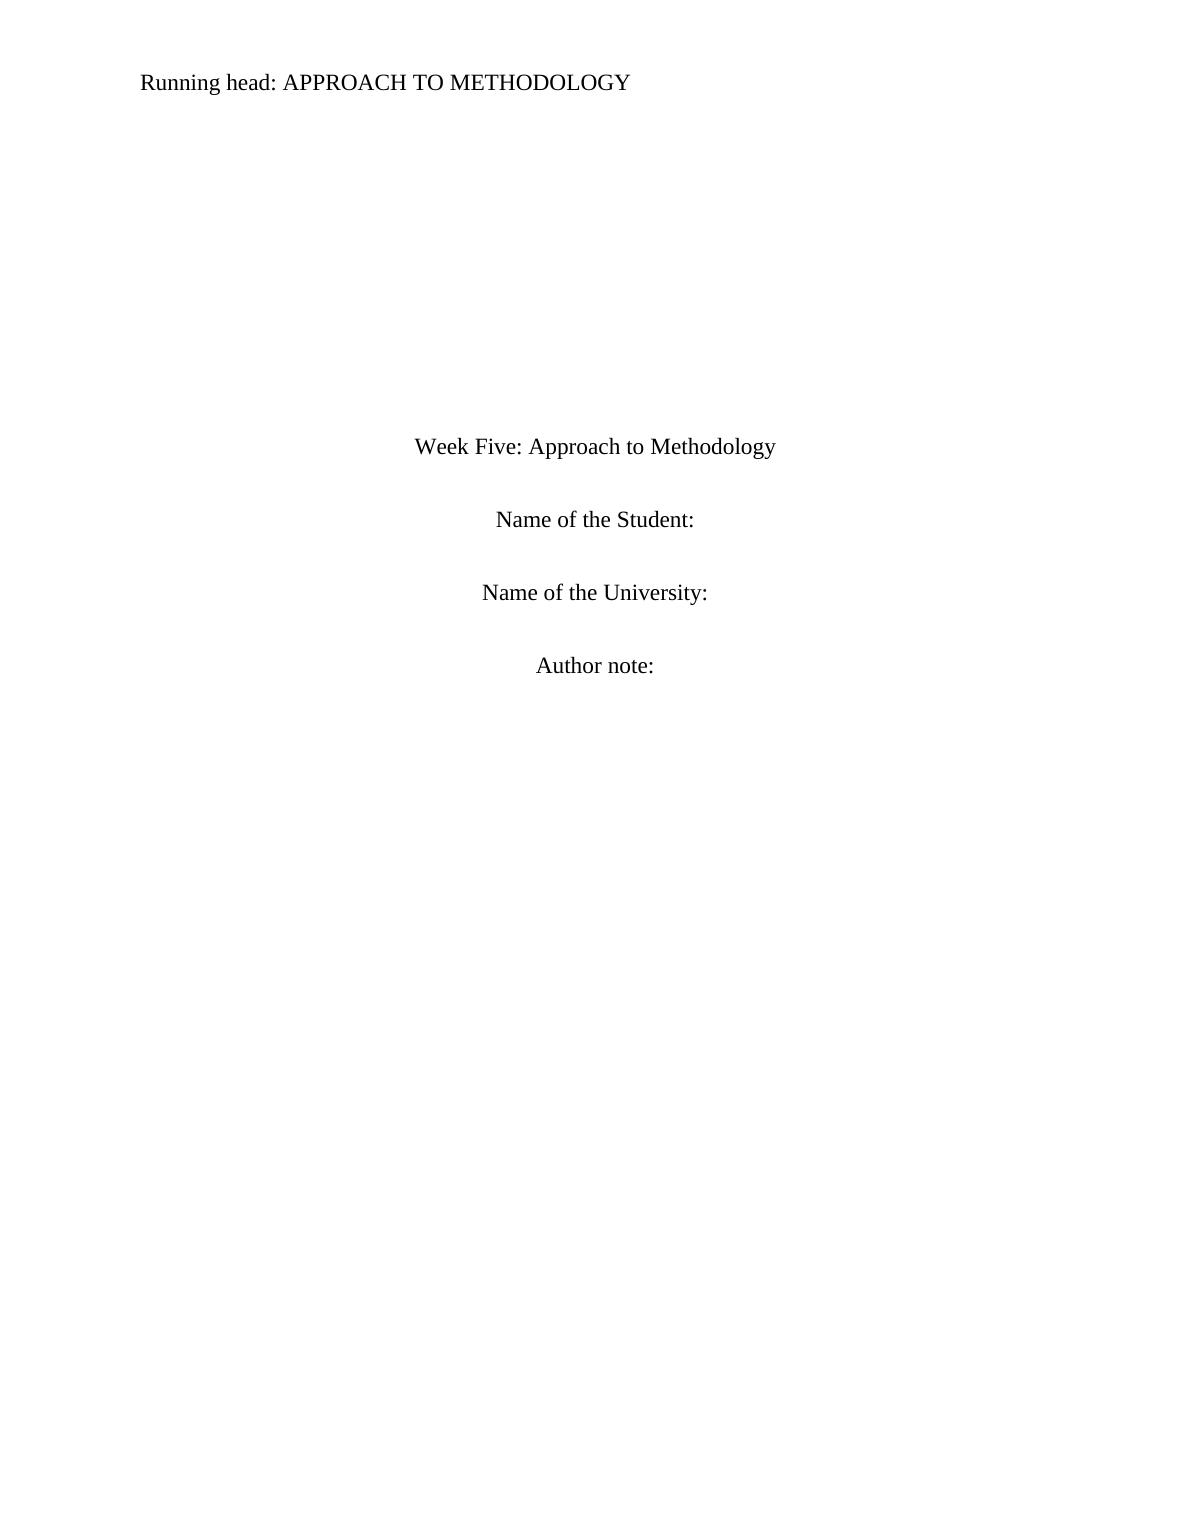 Approach and Methodology pdf_1